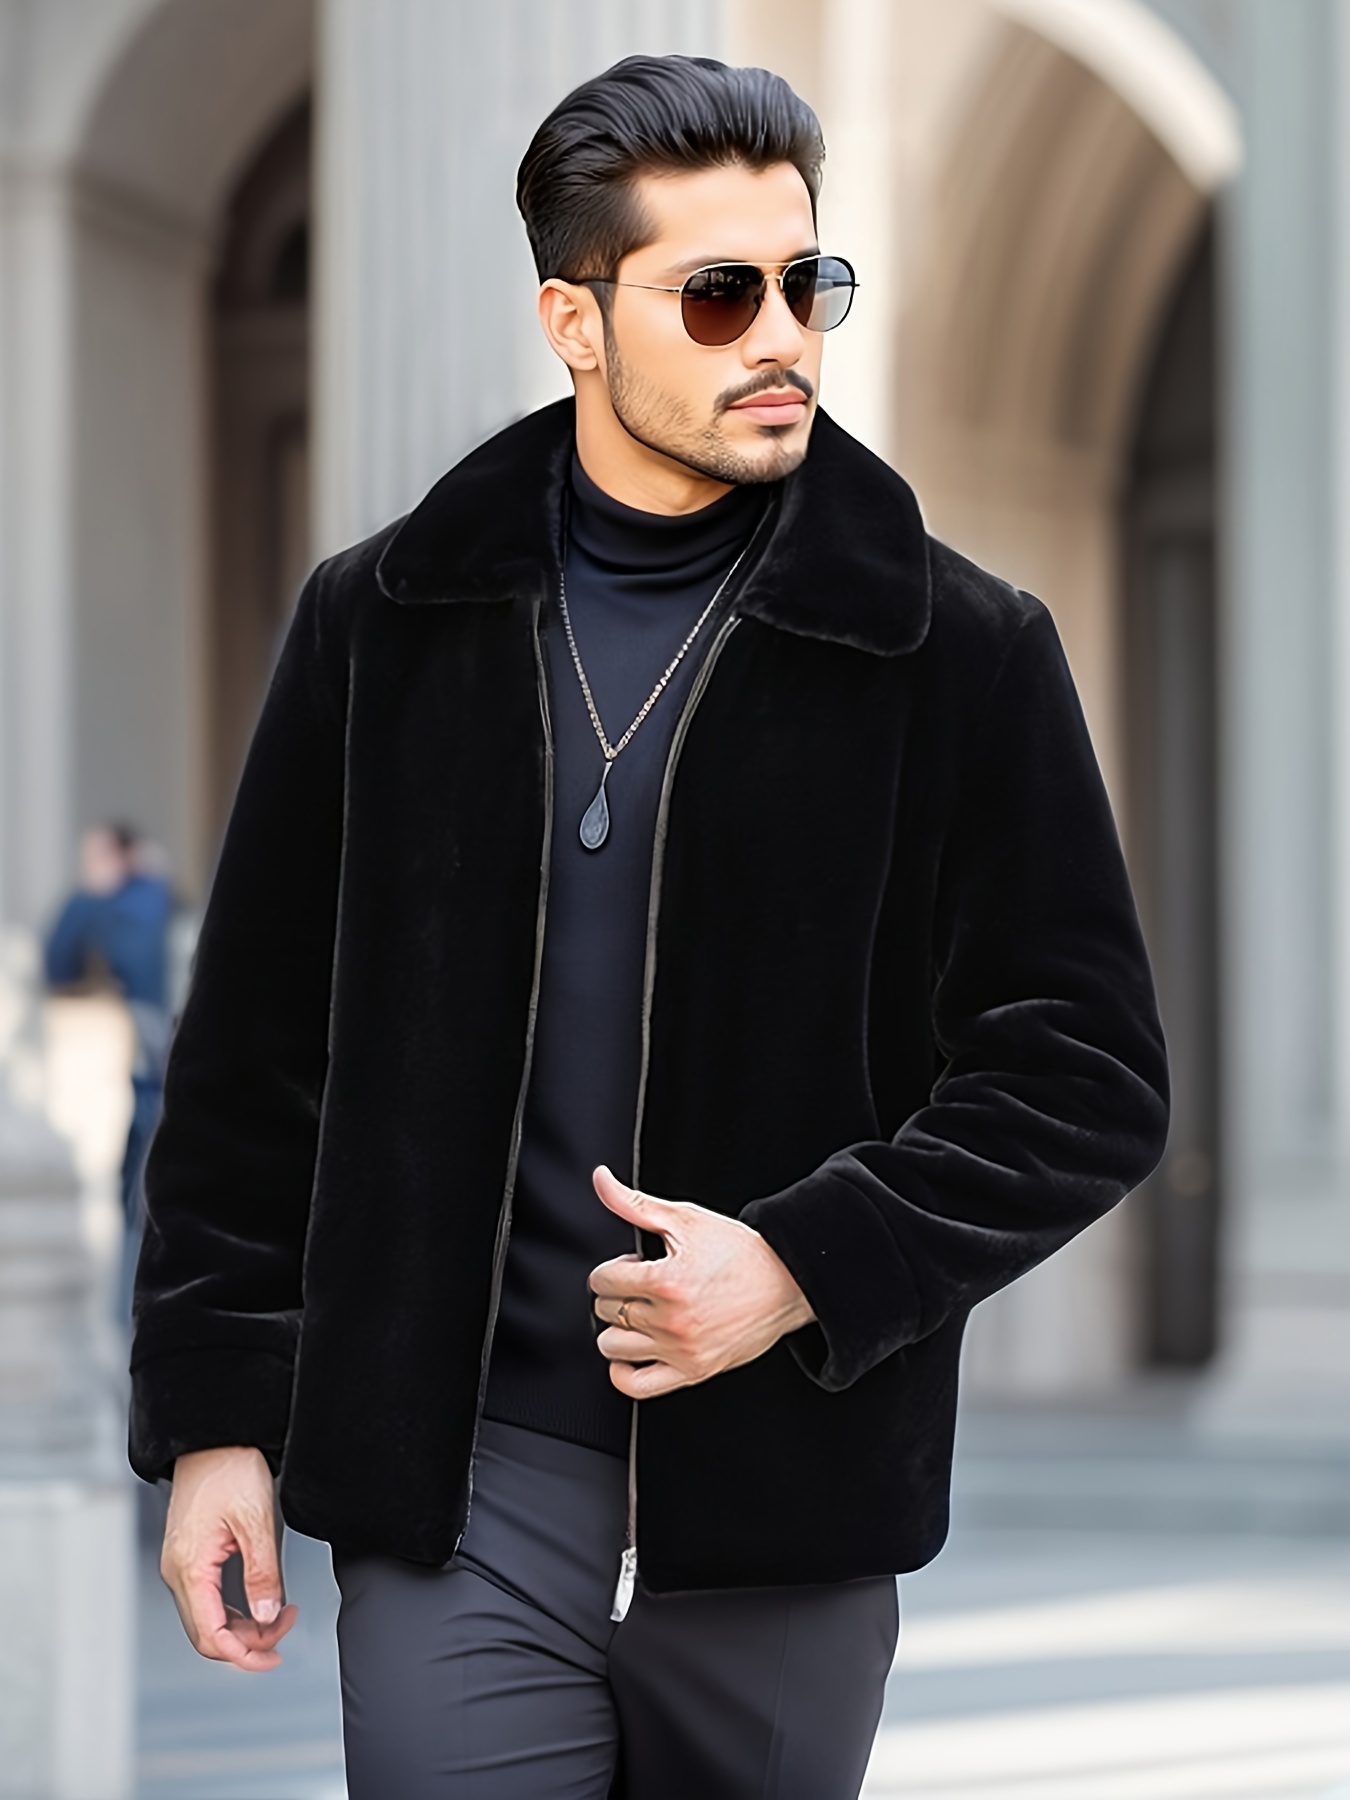 HOW'ON Men's Casual Sherpa Fleece Lined Jacket Warm Coat With Fur Collar